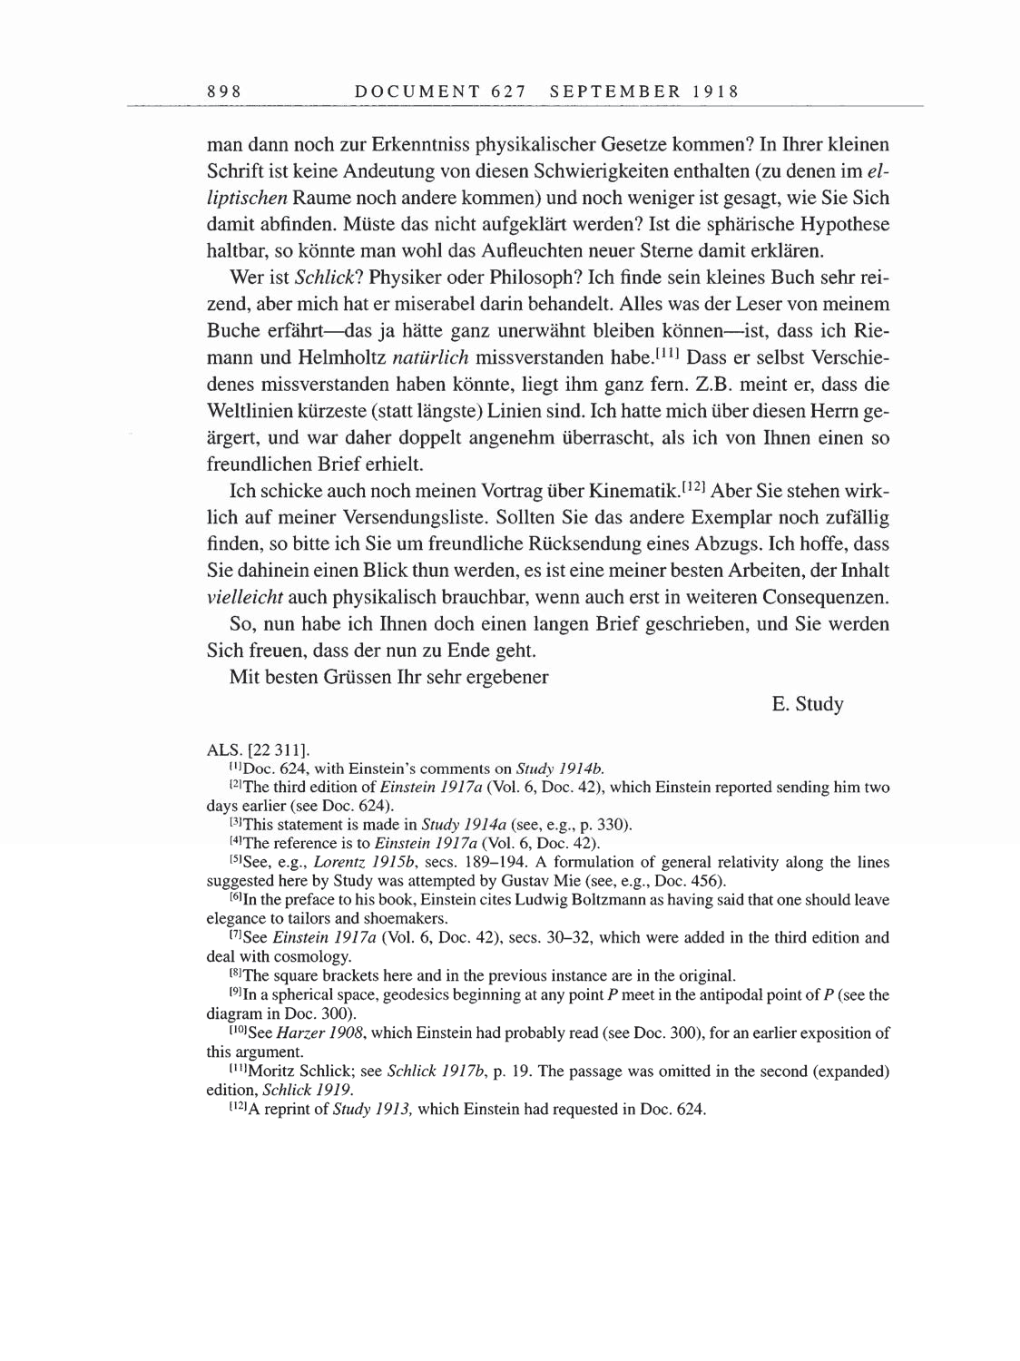 Volume 8, Part B: The Berlin Years: Correspondence 1918 page 898